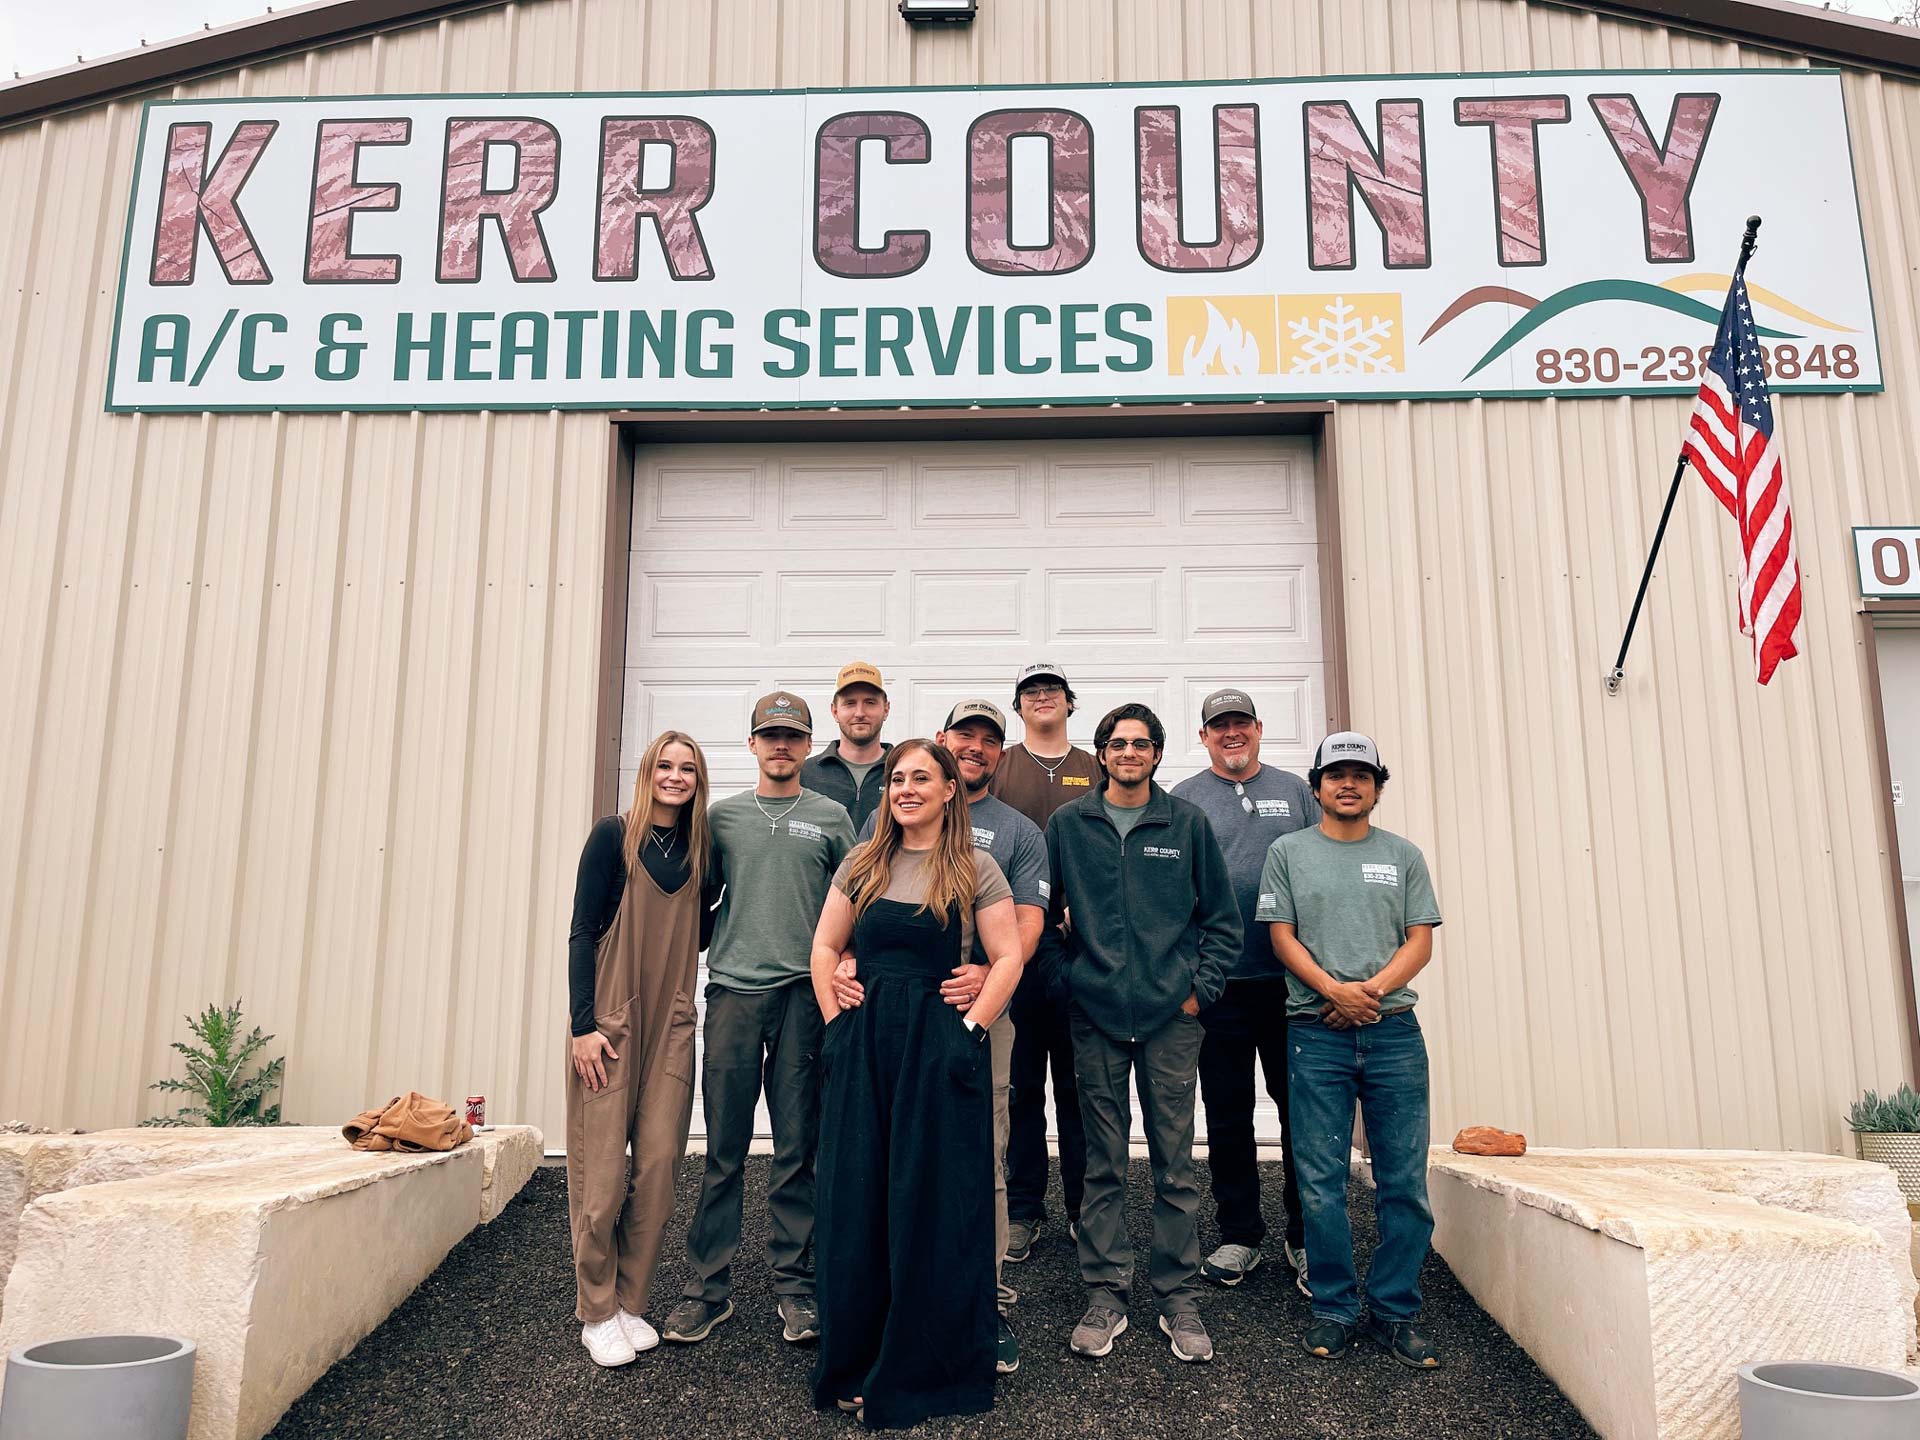 Kerr County A/C & Heating Services